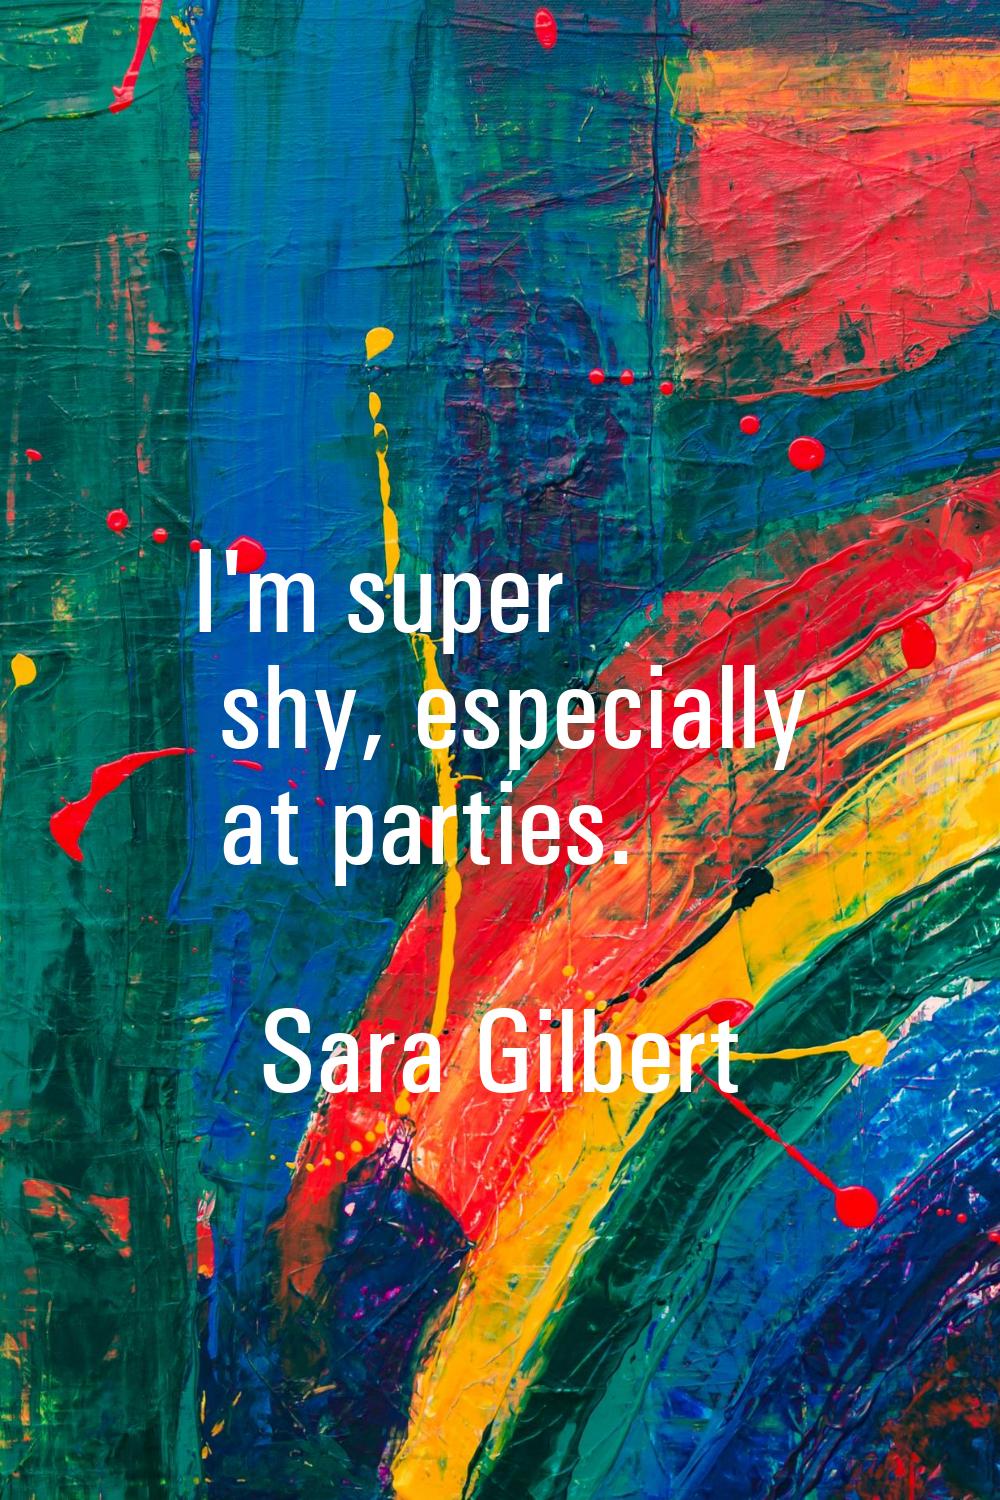 I'm super shy, especially at parties.